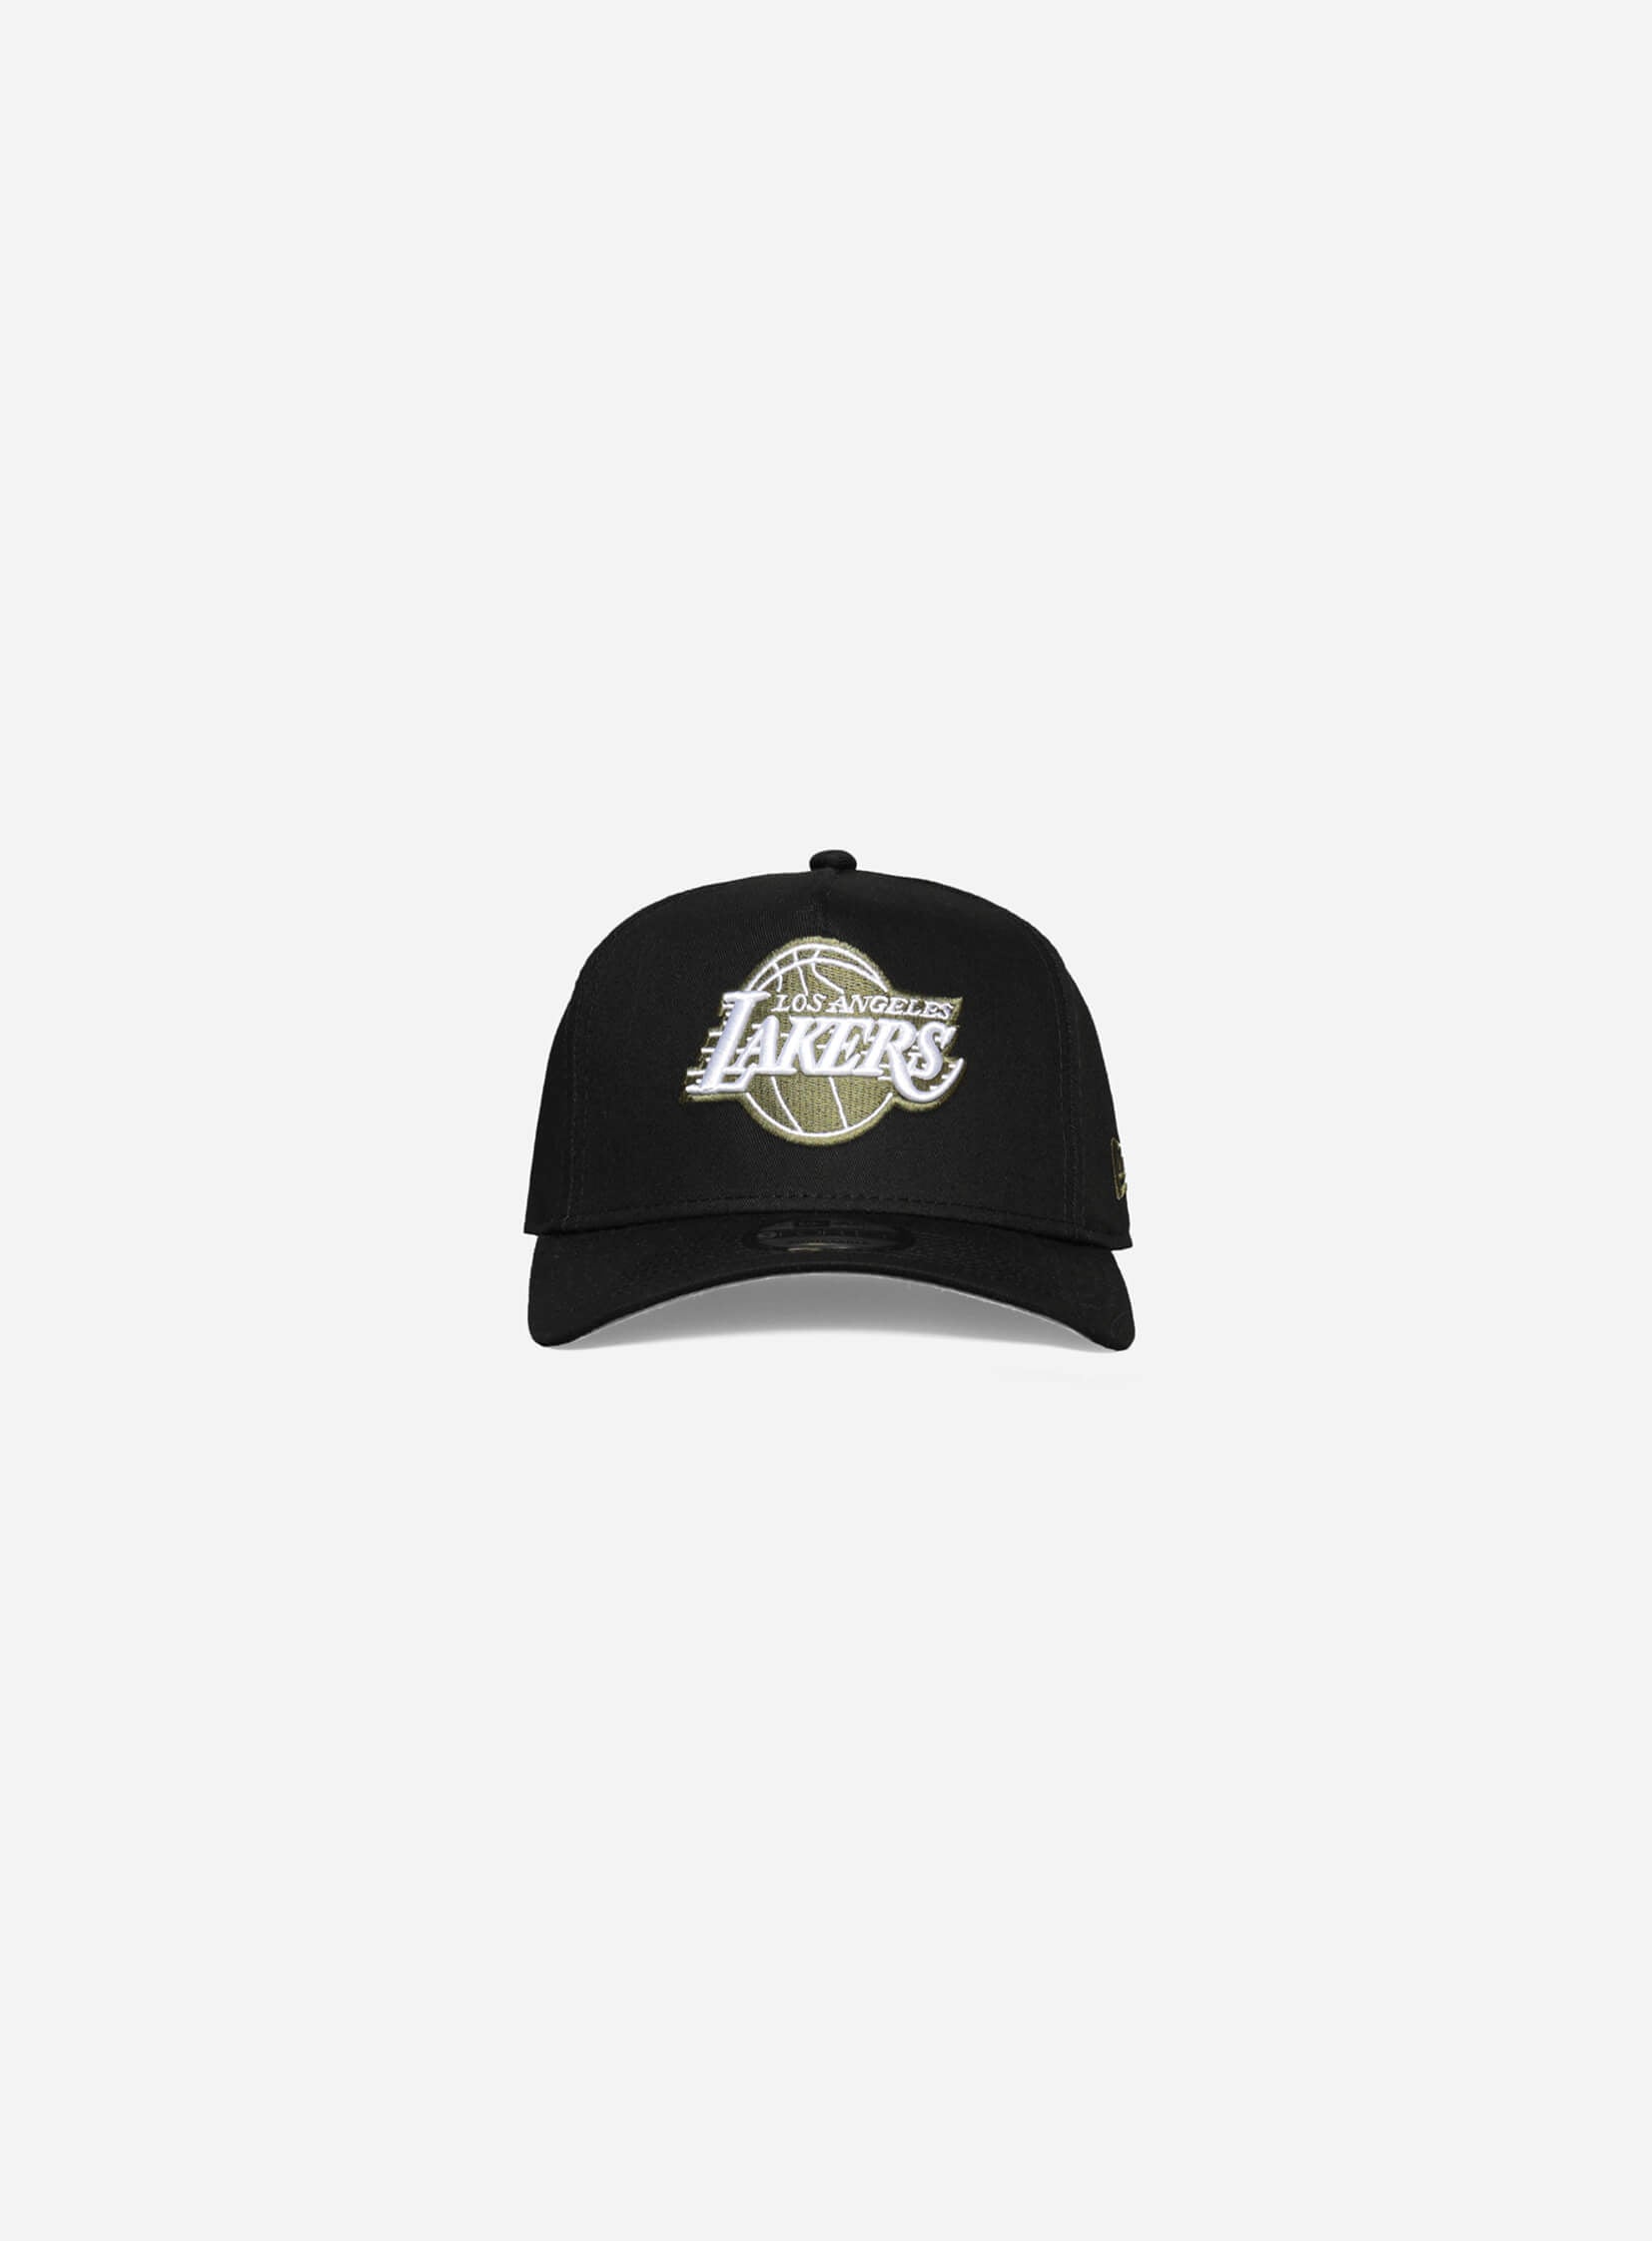 Los Angeles Lakers Black Olive 9Forty A-Frame Snapback